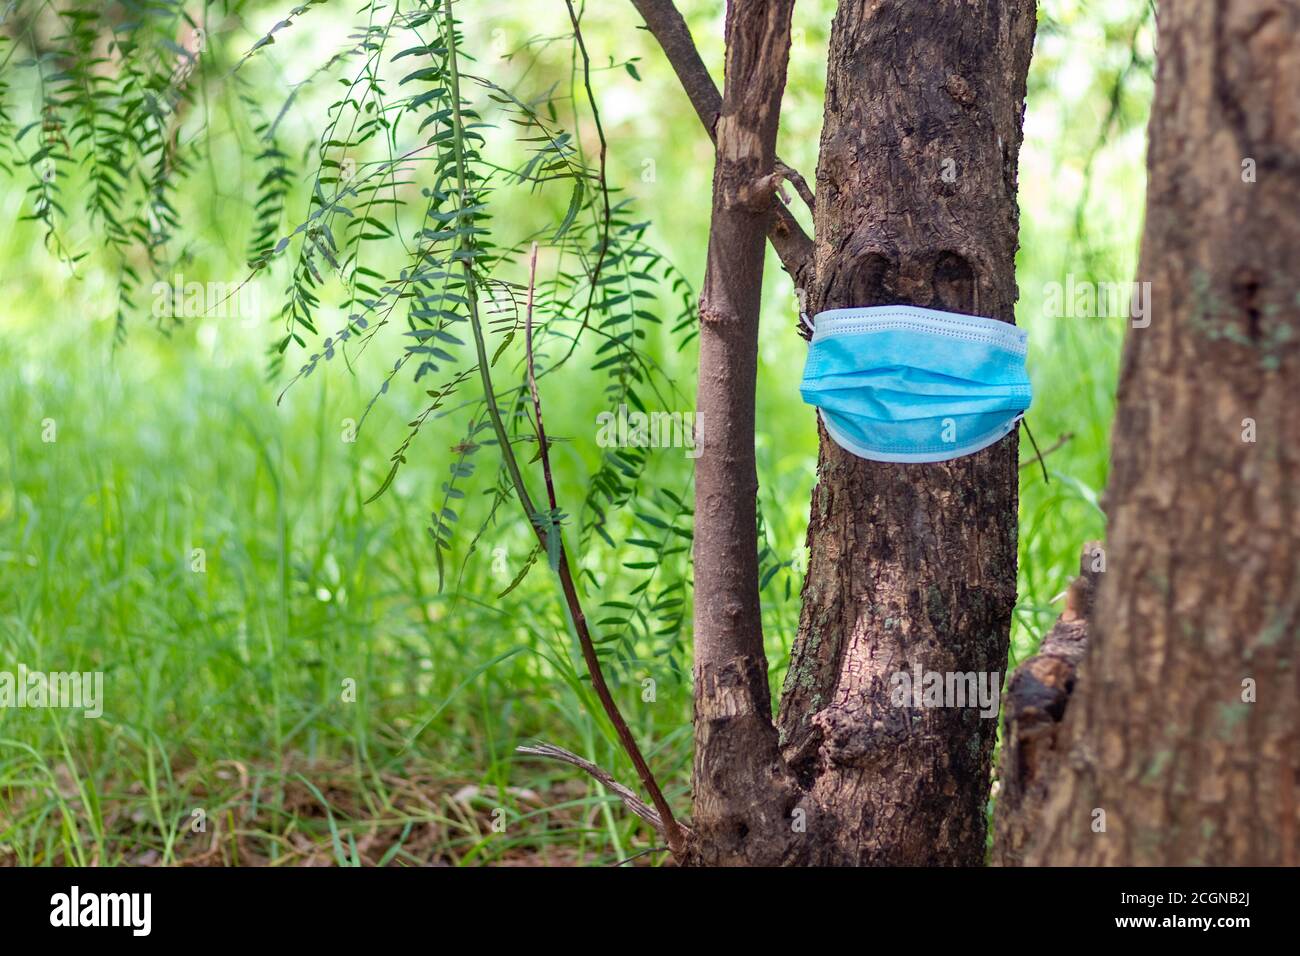 Tree in the middle of the forest wearing face masks as irony of the new normal. Coronavirus Stock Photo